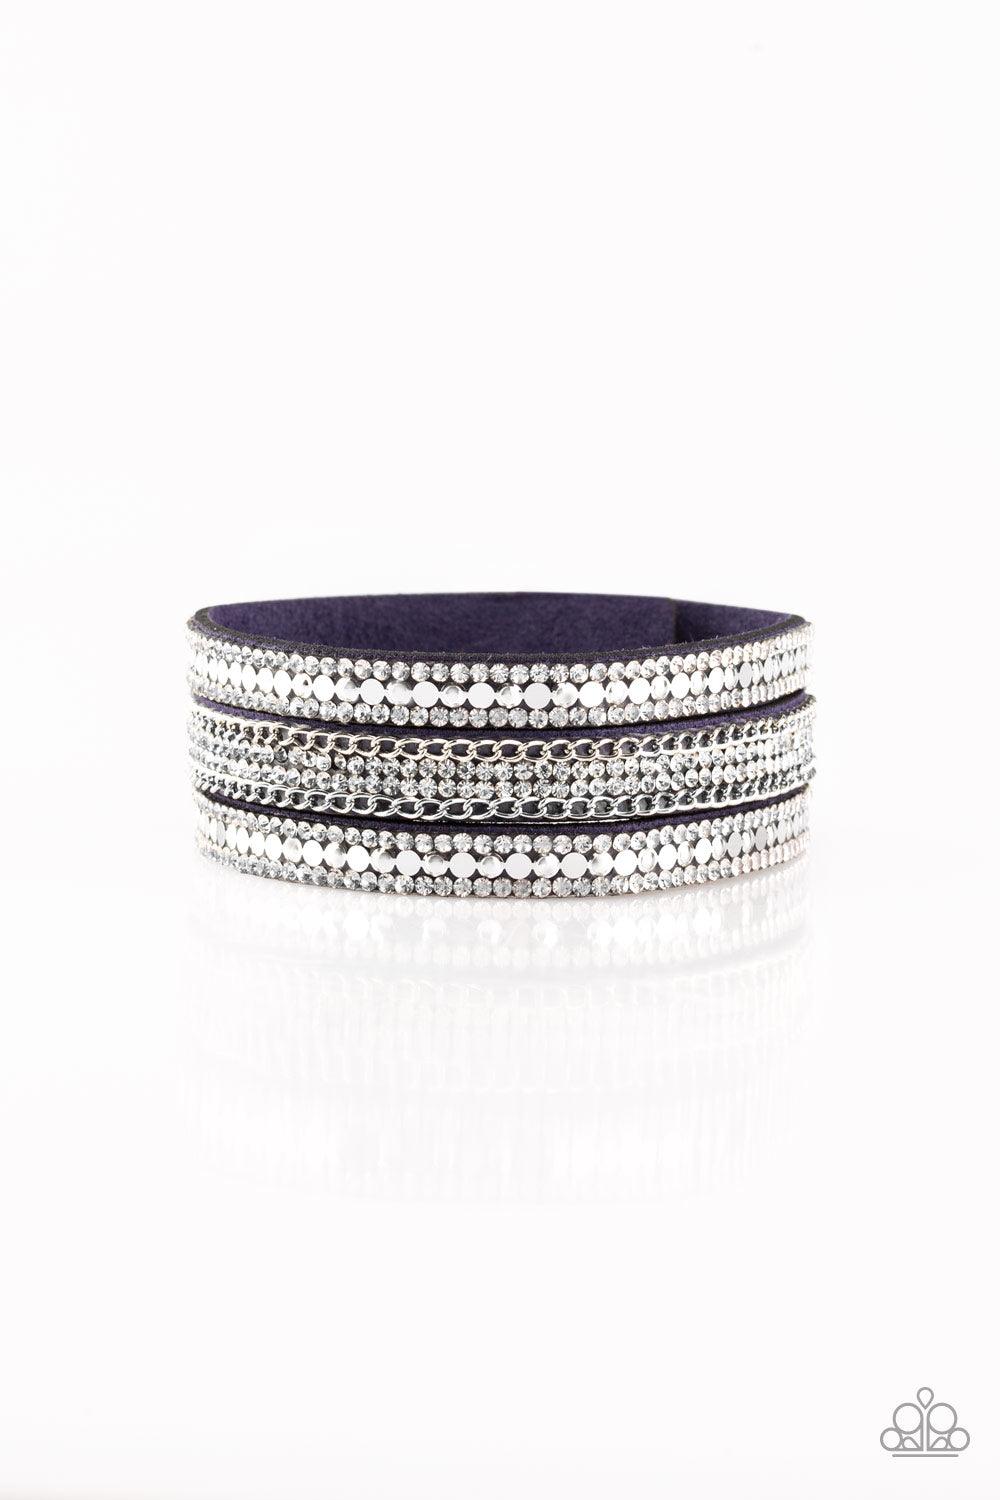 Paparazzi Accessories Fashion Fanatic - Blue Rows of flat silver discs, glassy white rhinestones, and shimmery silver chains are encrusted along blue suede bands for a sassy look. Features an adjustable snap closure. Sold as one individual bracelet. Jewel